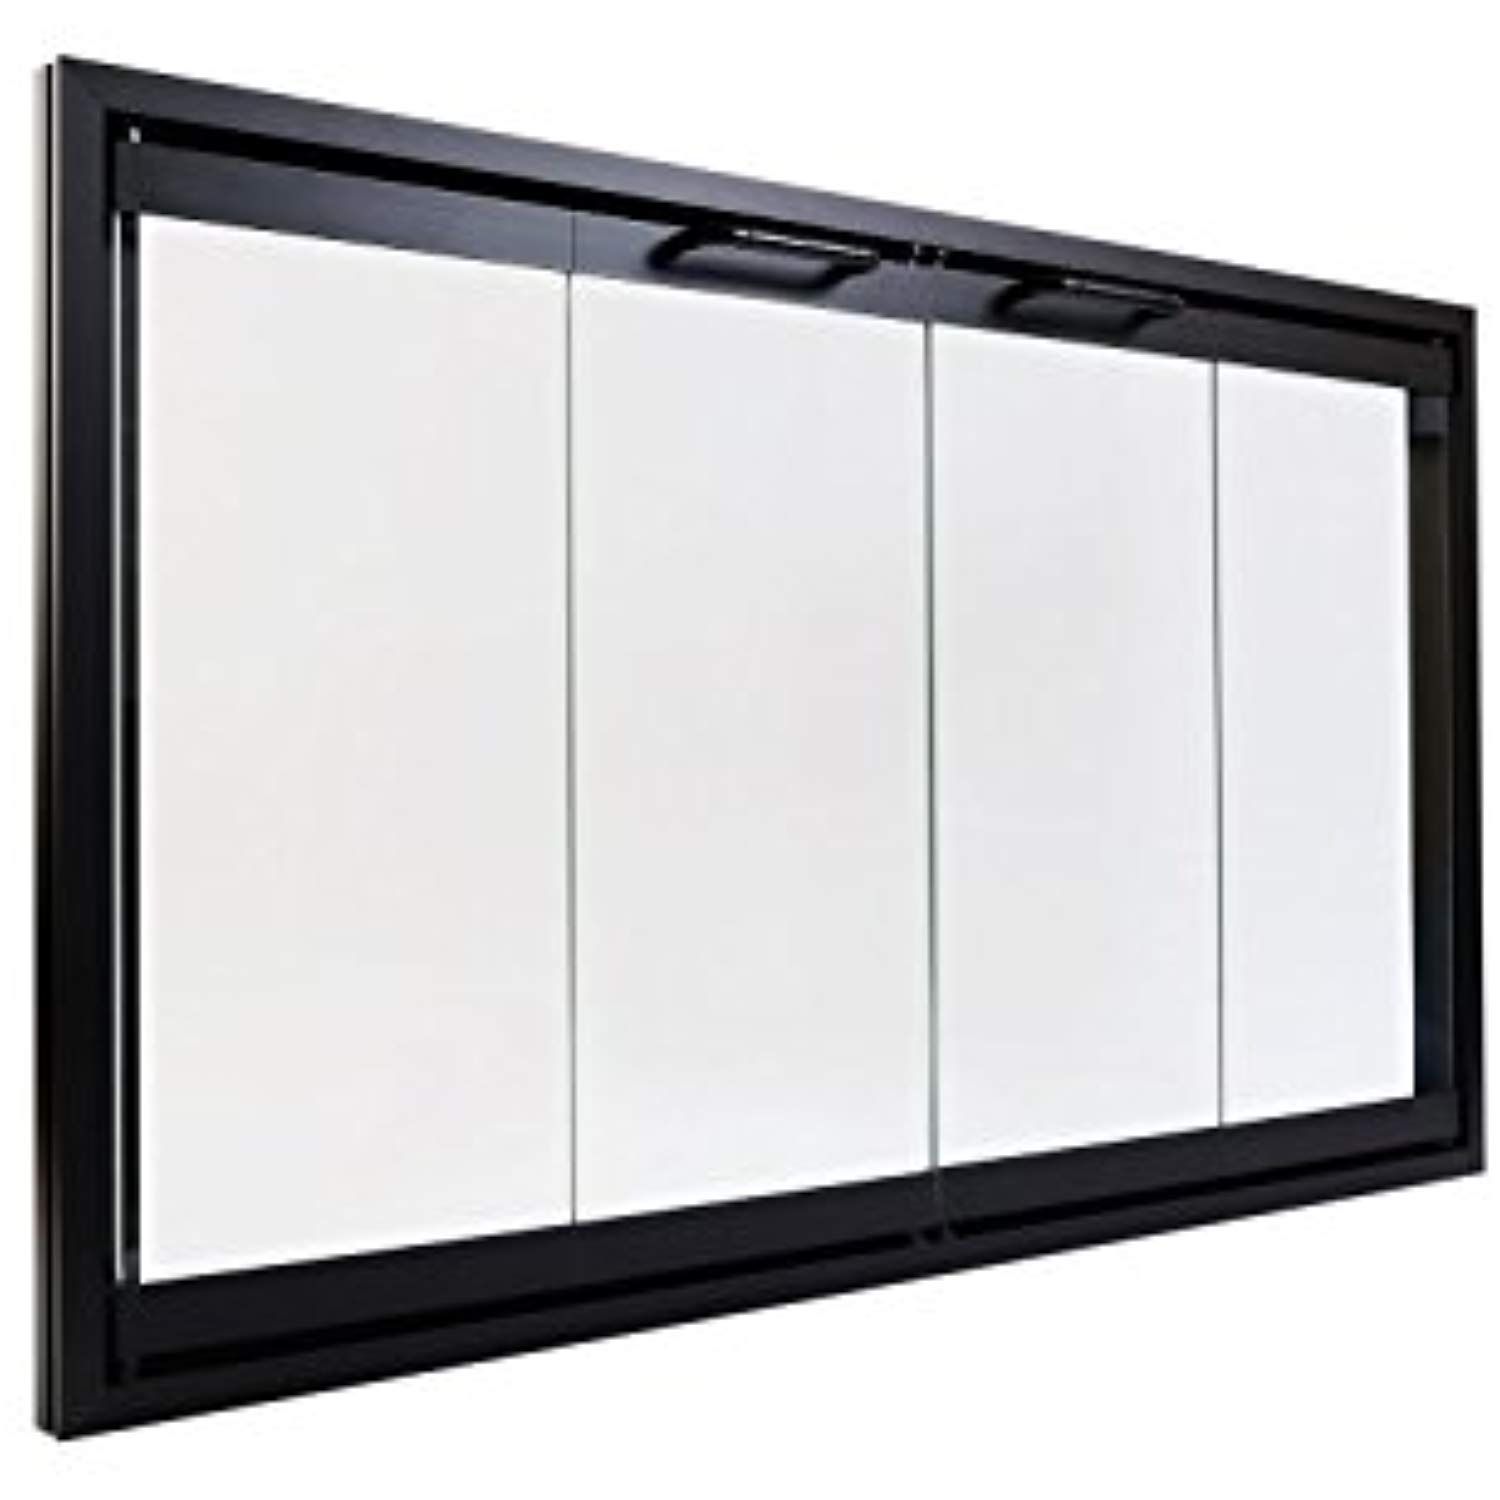 Bifold Glass Fireplace Doors Awesome Heatilator Bi Fold Glass Fireplace Door Easy to Install